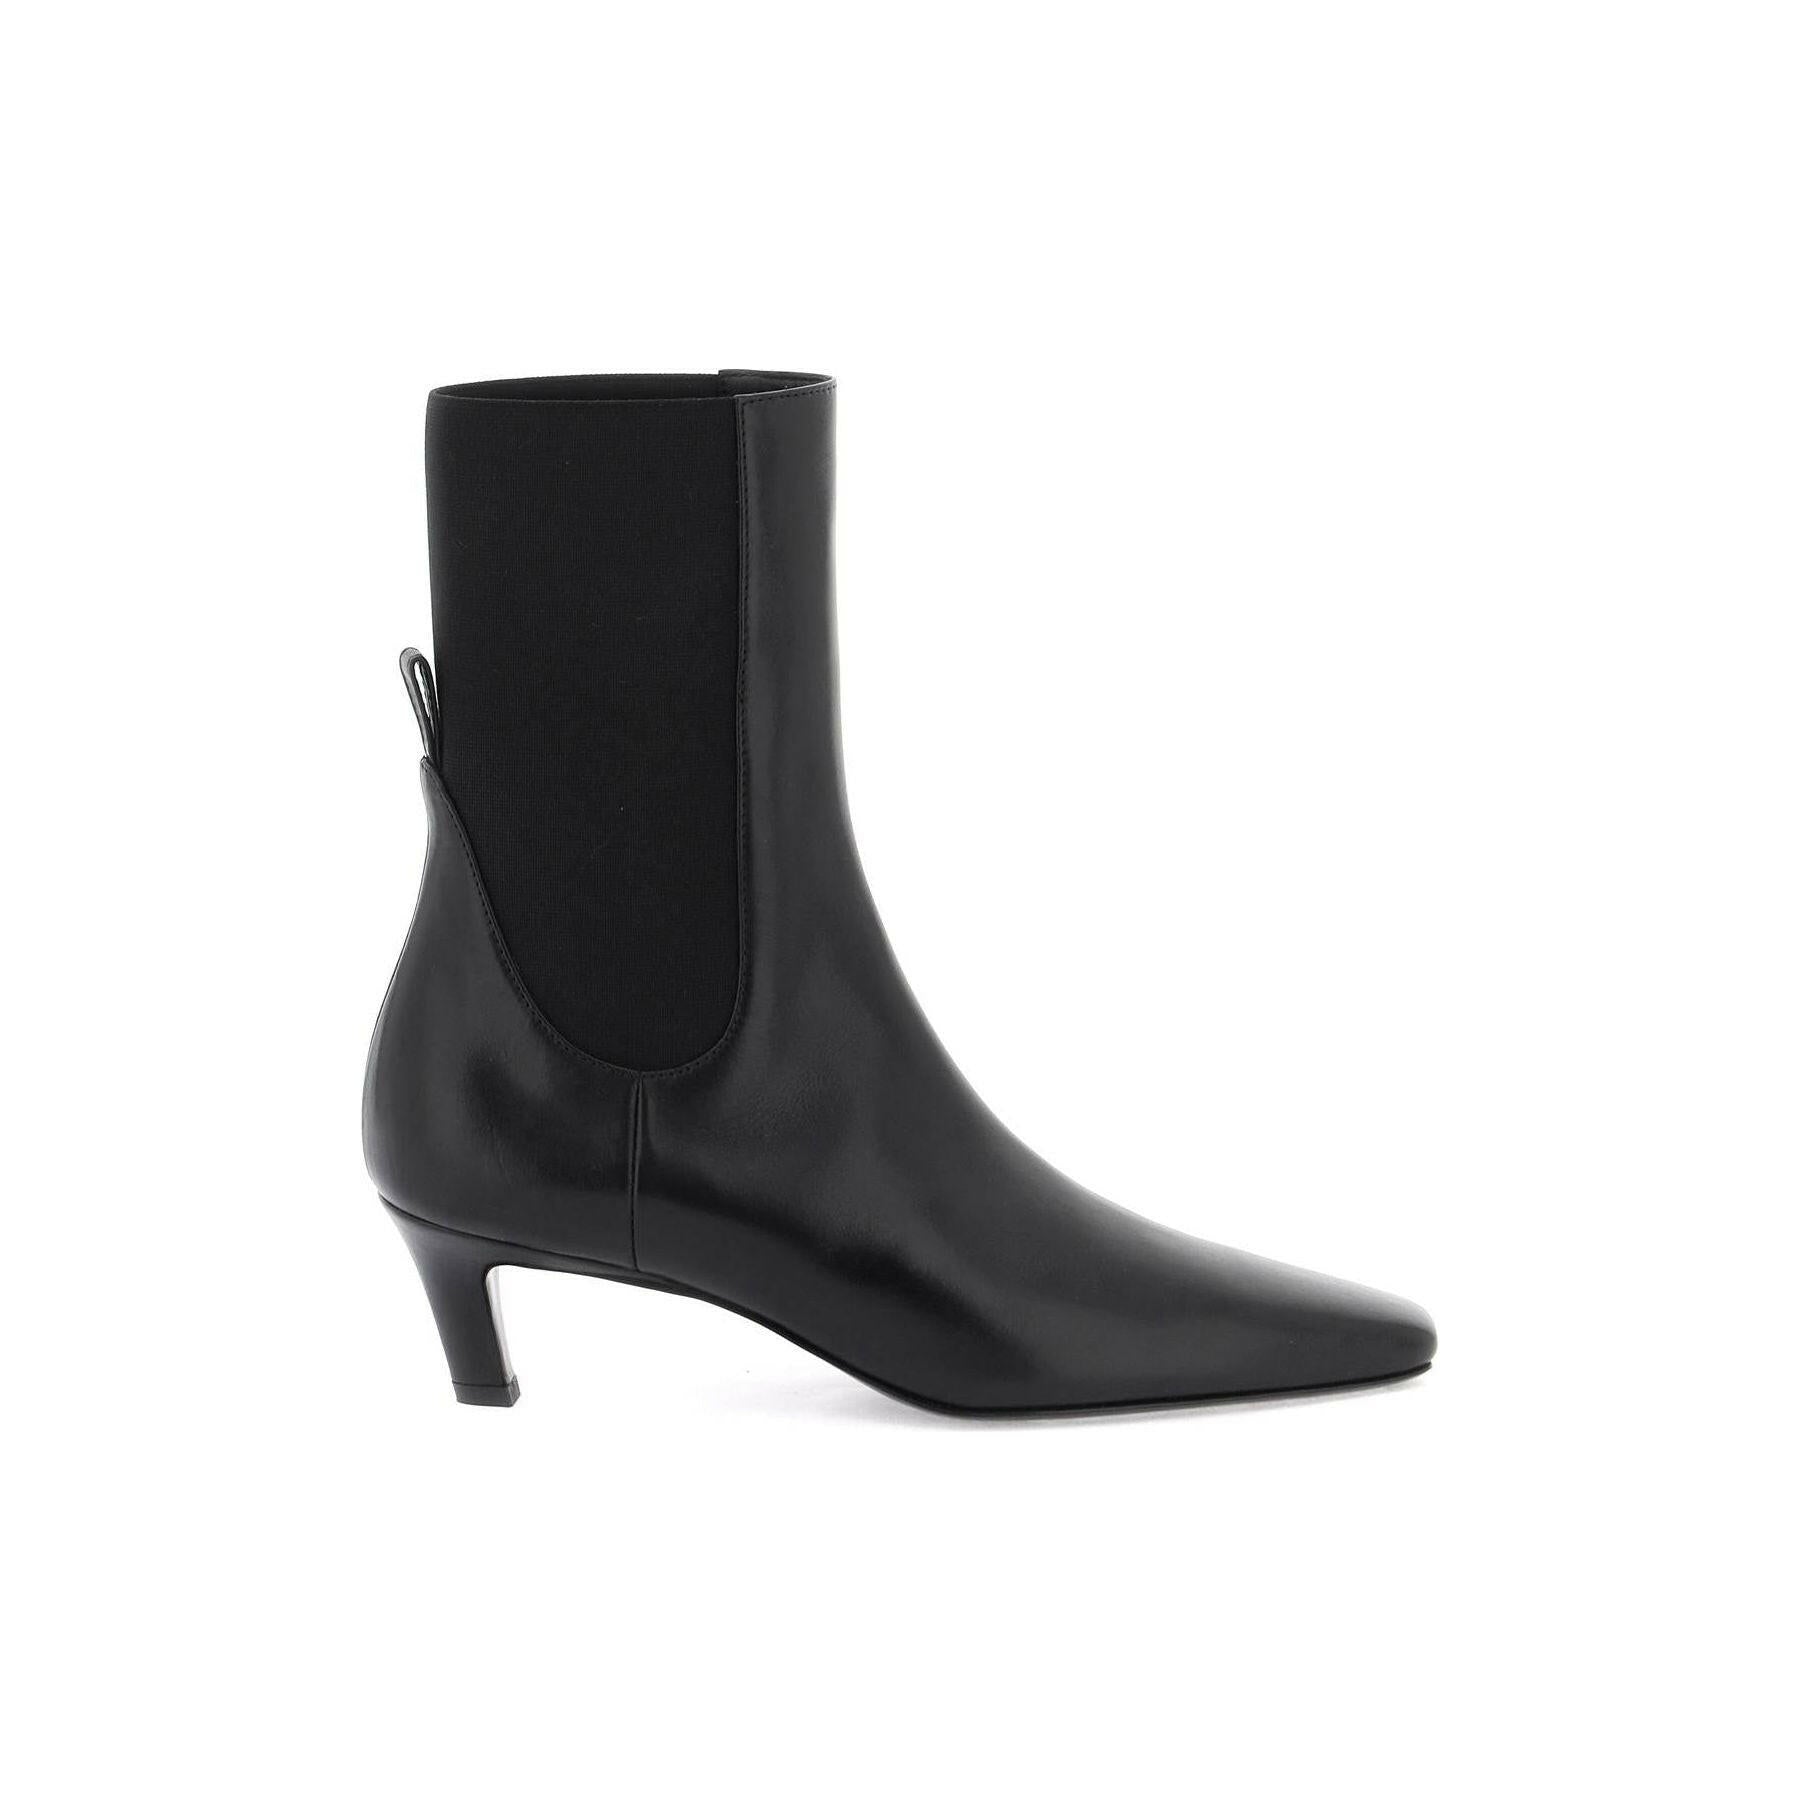 The Mid Heel Leather Boots